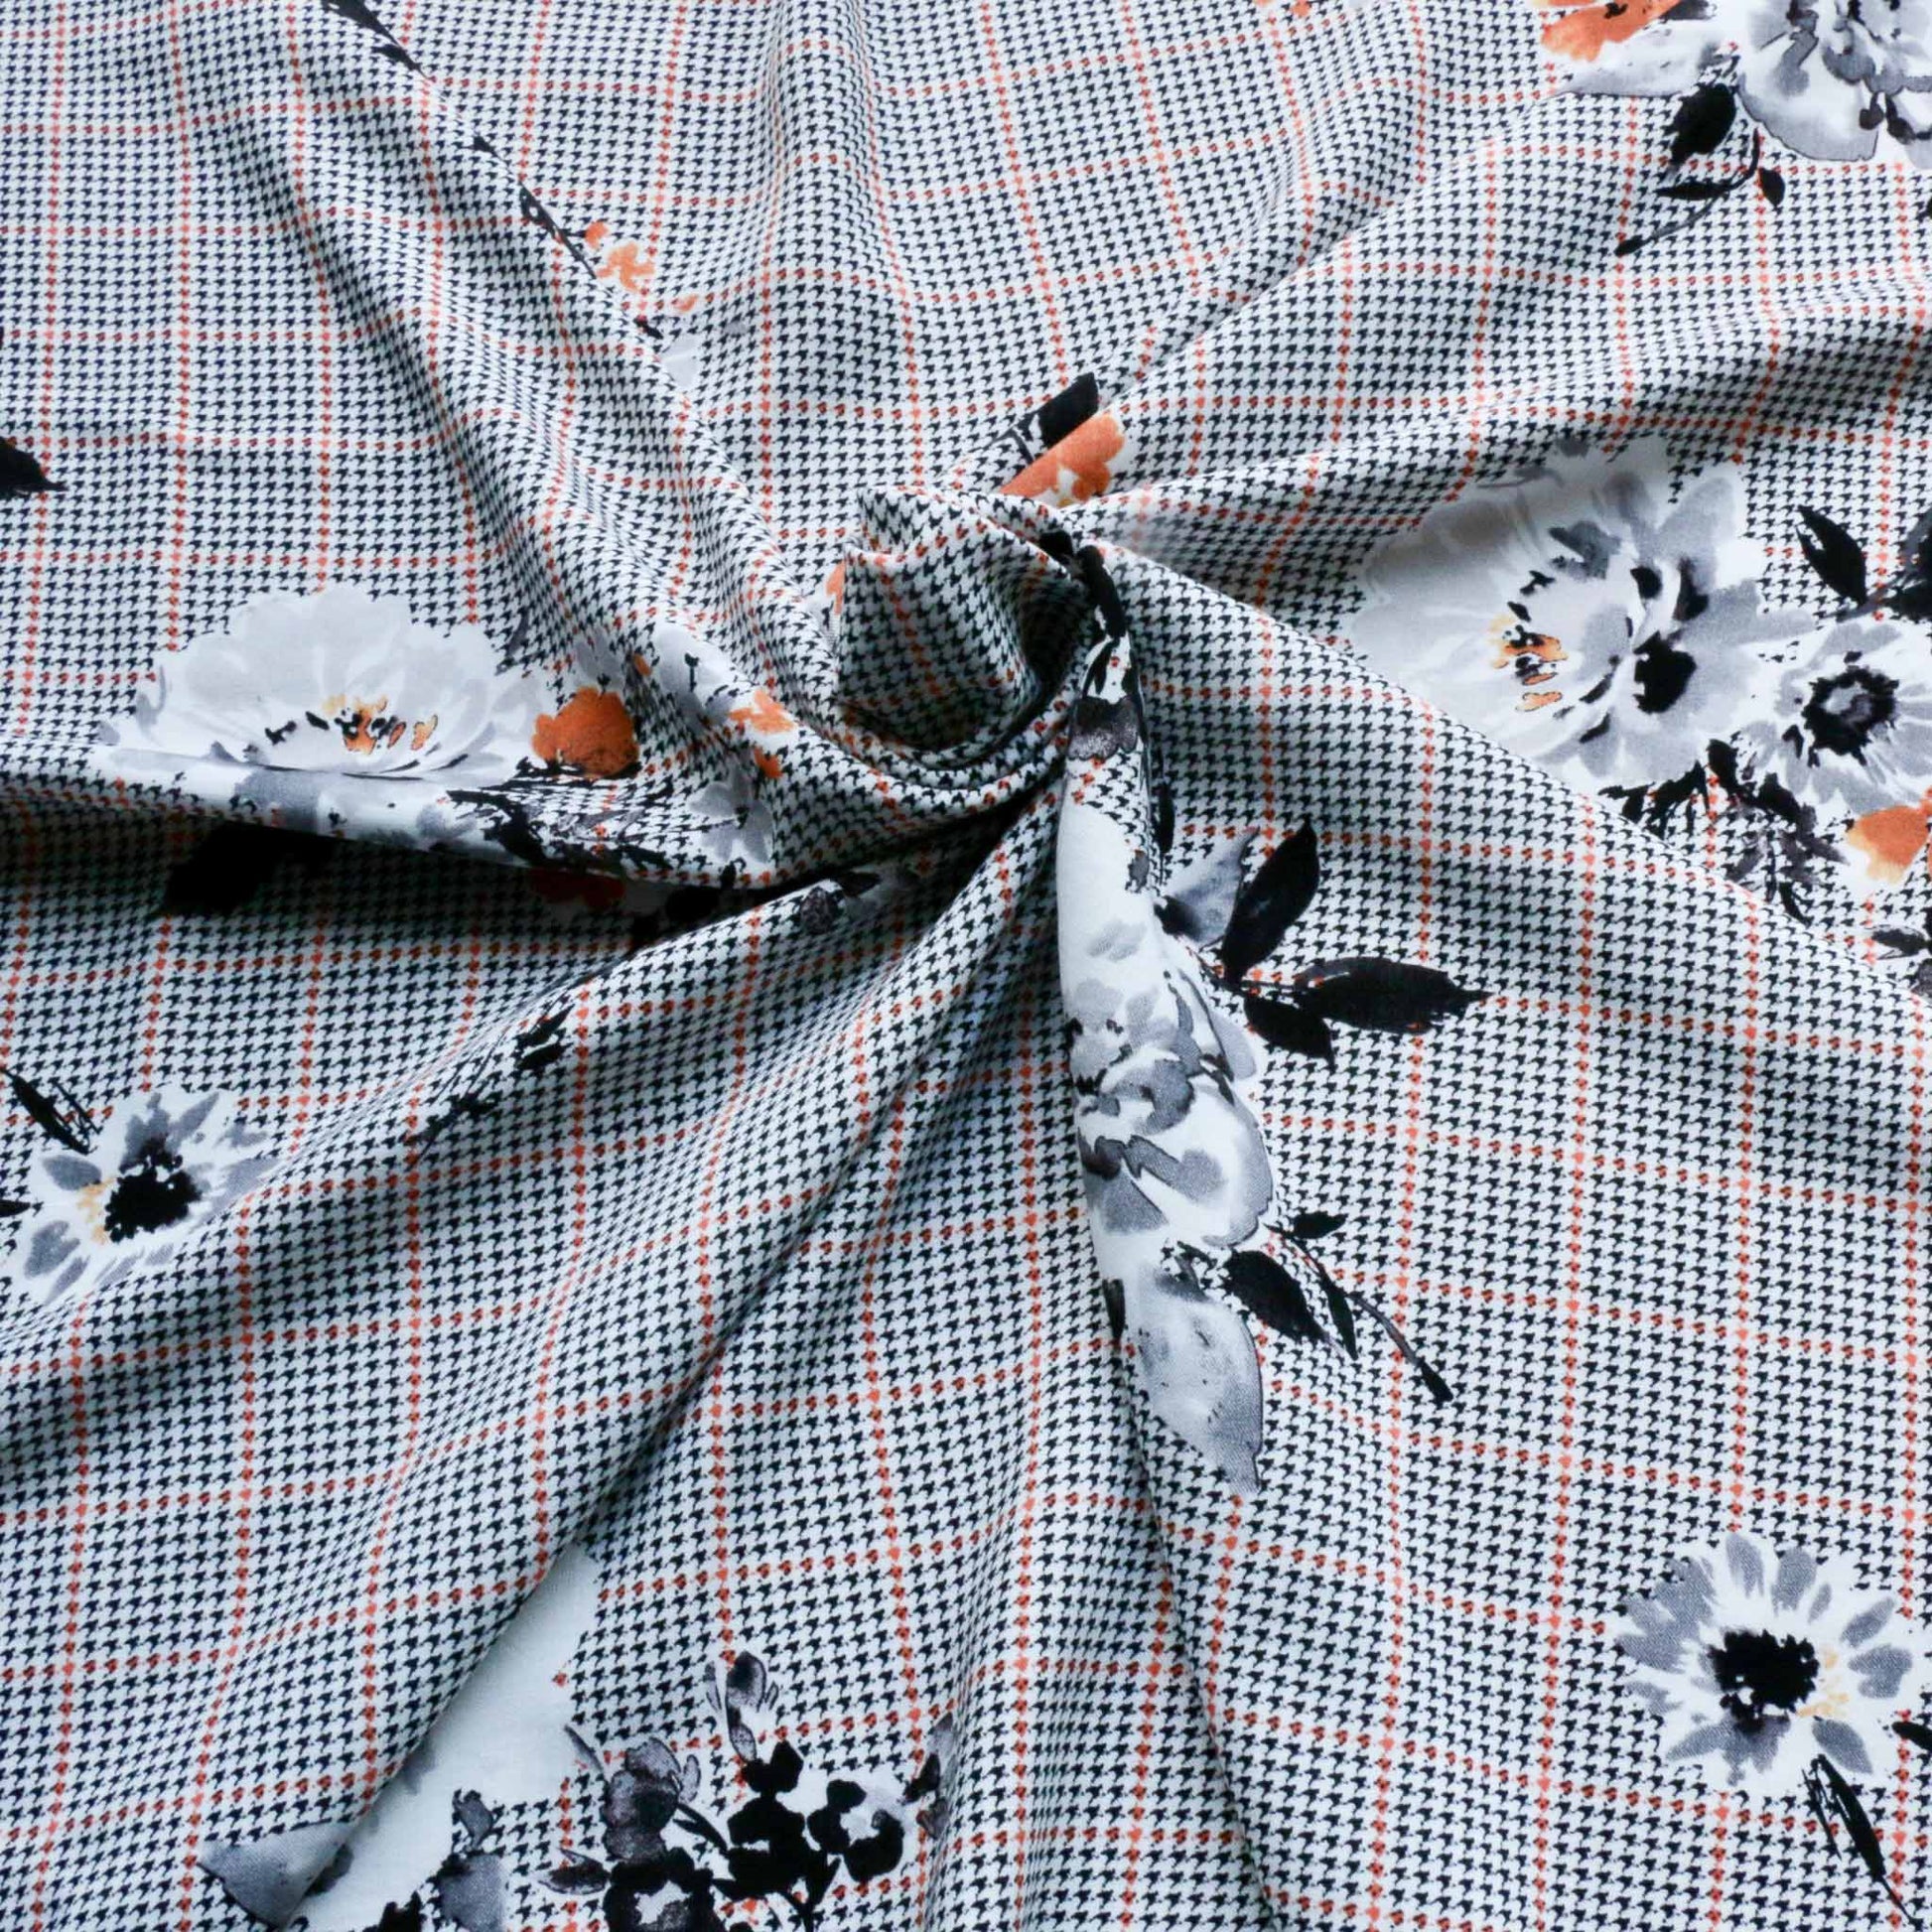 houndtooth check viscose challis dressmaking fabric in grey with black and orange floral design